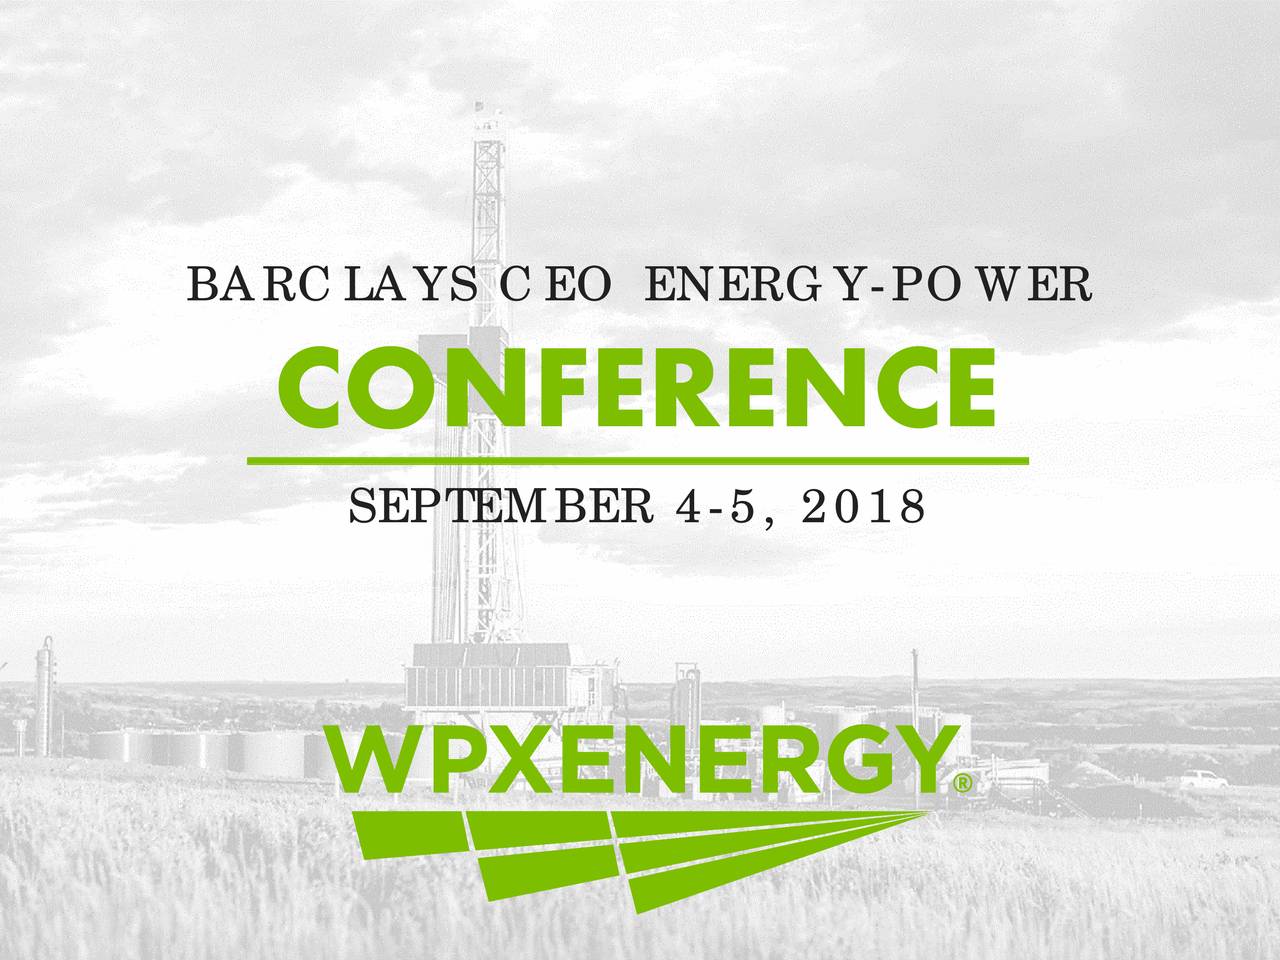 WPX Energy (WPX) Presents at Barclays CEO EnergyPower Conference